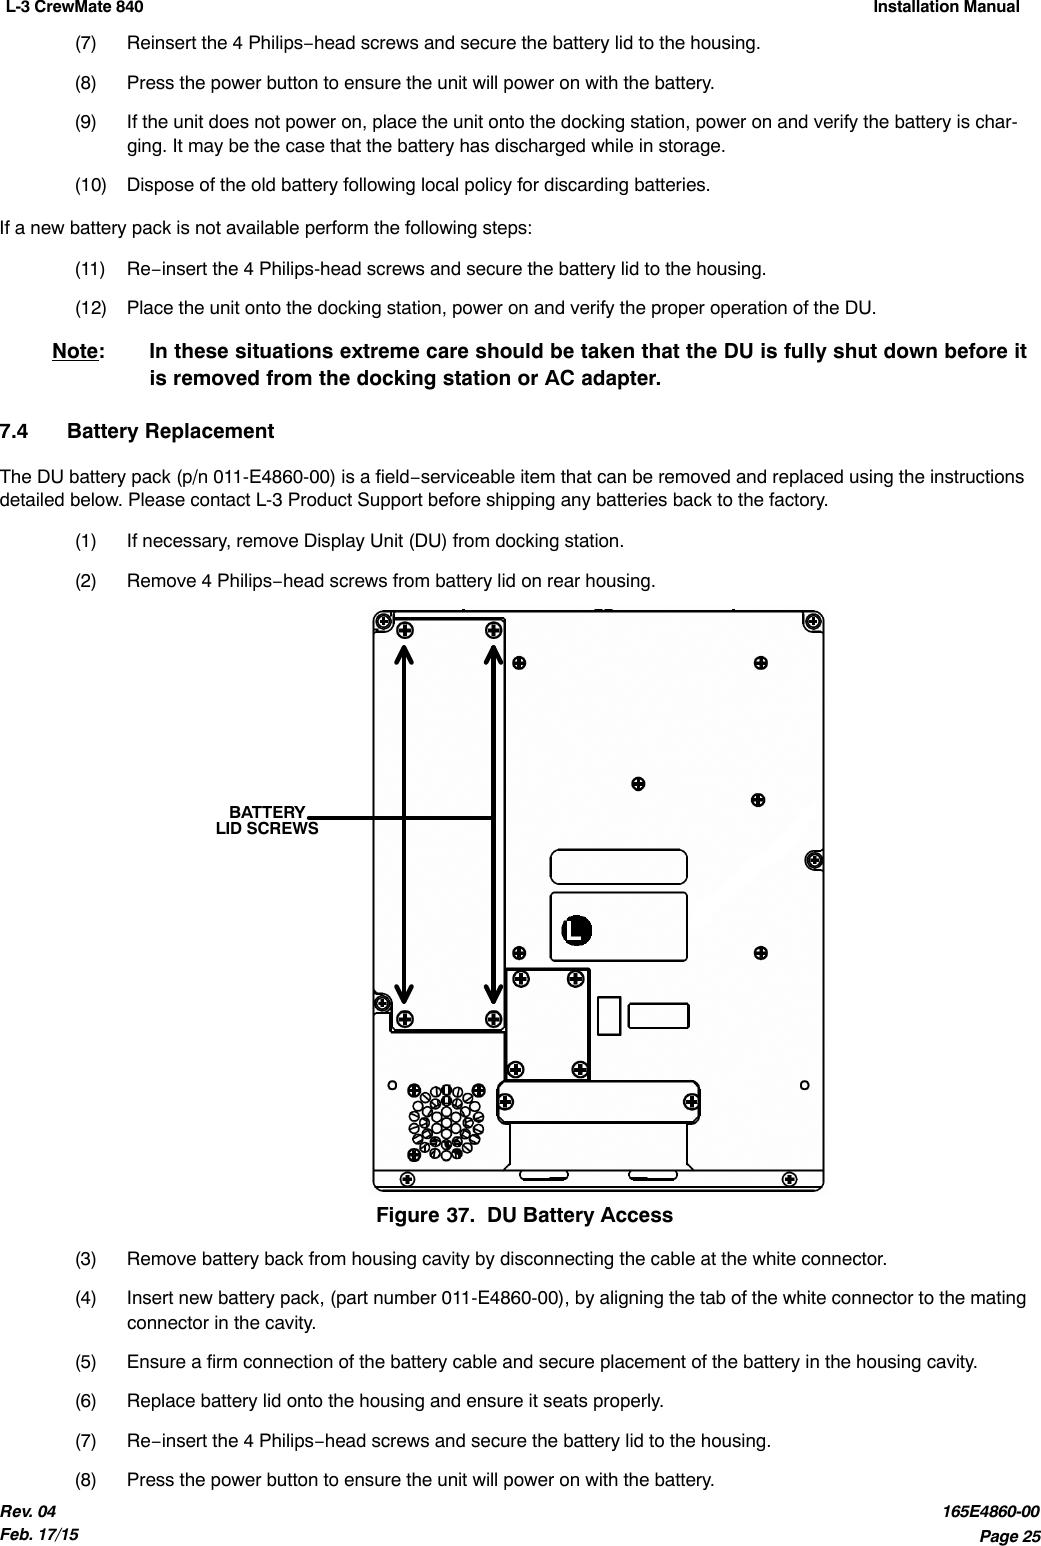 L-3 CrewMate 840 Installation Manual Page 25Rev. 04Feb. 17/15165E4860-00(7) Reinsert the 4 Philips−head screws and secure the battery lid to the housing.(8) Press the power button to ensure the unit will power on with the battery.(9) If the unit does not power on, place the unit onto the docking station, power on and verify the battery is char-ging. It may be the case that the battery has discharged while in storage.(10) Dispose of the old battery following local policy for discarding batteries.If a new battery pack is not available perform the following steps:(11) Re−insert the 4 Philips-head screws and secure the battery lid to the housing.(12) Place the unit onto the docking station, power on and verify the proper operation of the DU.Note:  In these situations extreme care should be taken that the DU is fully shut down before itis removed from the docking station or AC adapter.7.4 Battery ReplacementThe DU battery pack (p/n 011-E4860-00) is a field−serviceable item that can be removed and replaced using the instructionsdetailed below. Please contact L-3 Product Support before shipping any batteries back to the factory.(1) If necessary, remove Display Unit (DU) from docking station.(2) Remove 4 Philips−head screws from battery lid on rear housing.BATTERYLID SCREWSFigure 37.  DU Battery Access(3) Remove battery back from housing cavity by disconnecting the cable at the white connector.(4) Insert new battery pack, (part number 011-E4860-00), by aligning the tab of the white connector to the matingconnector in the cavity.(5) Ensure a firm connection of the battery cable and secure placement of the battery in the housing cavity.(6) Replace battery lid onto the housing and ensure it seats properly.(7) Re−insert the 4 Philips−head screws and secure the battery lid to the housing.(8) Press the power button to ensure the unit will power on with the battery.